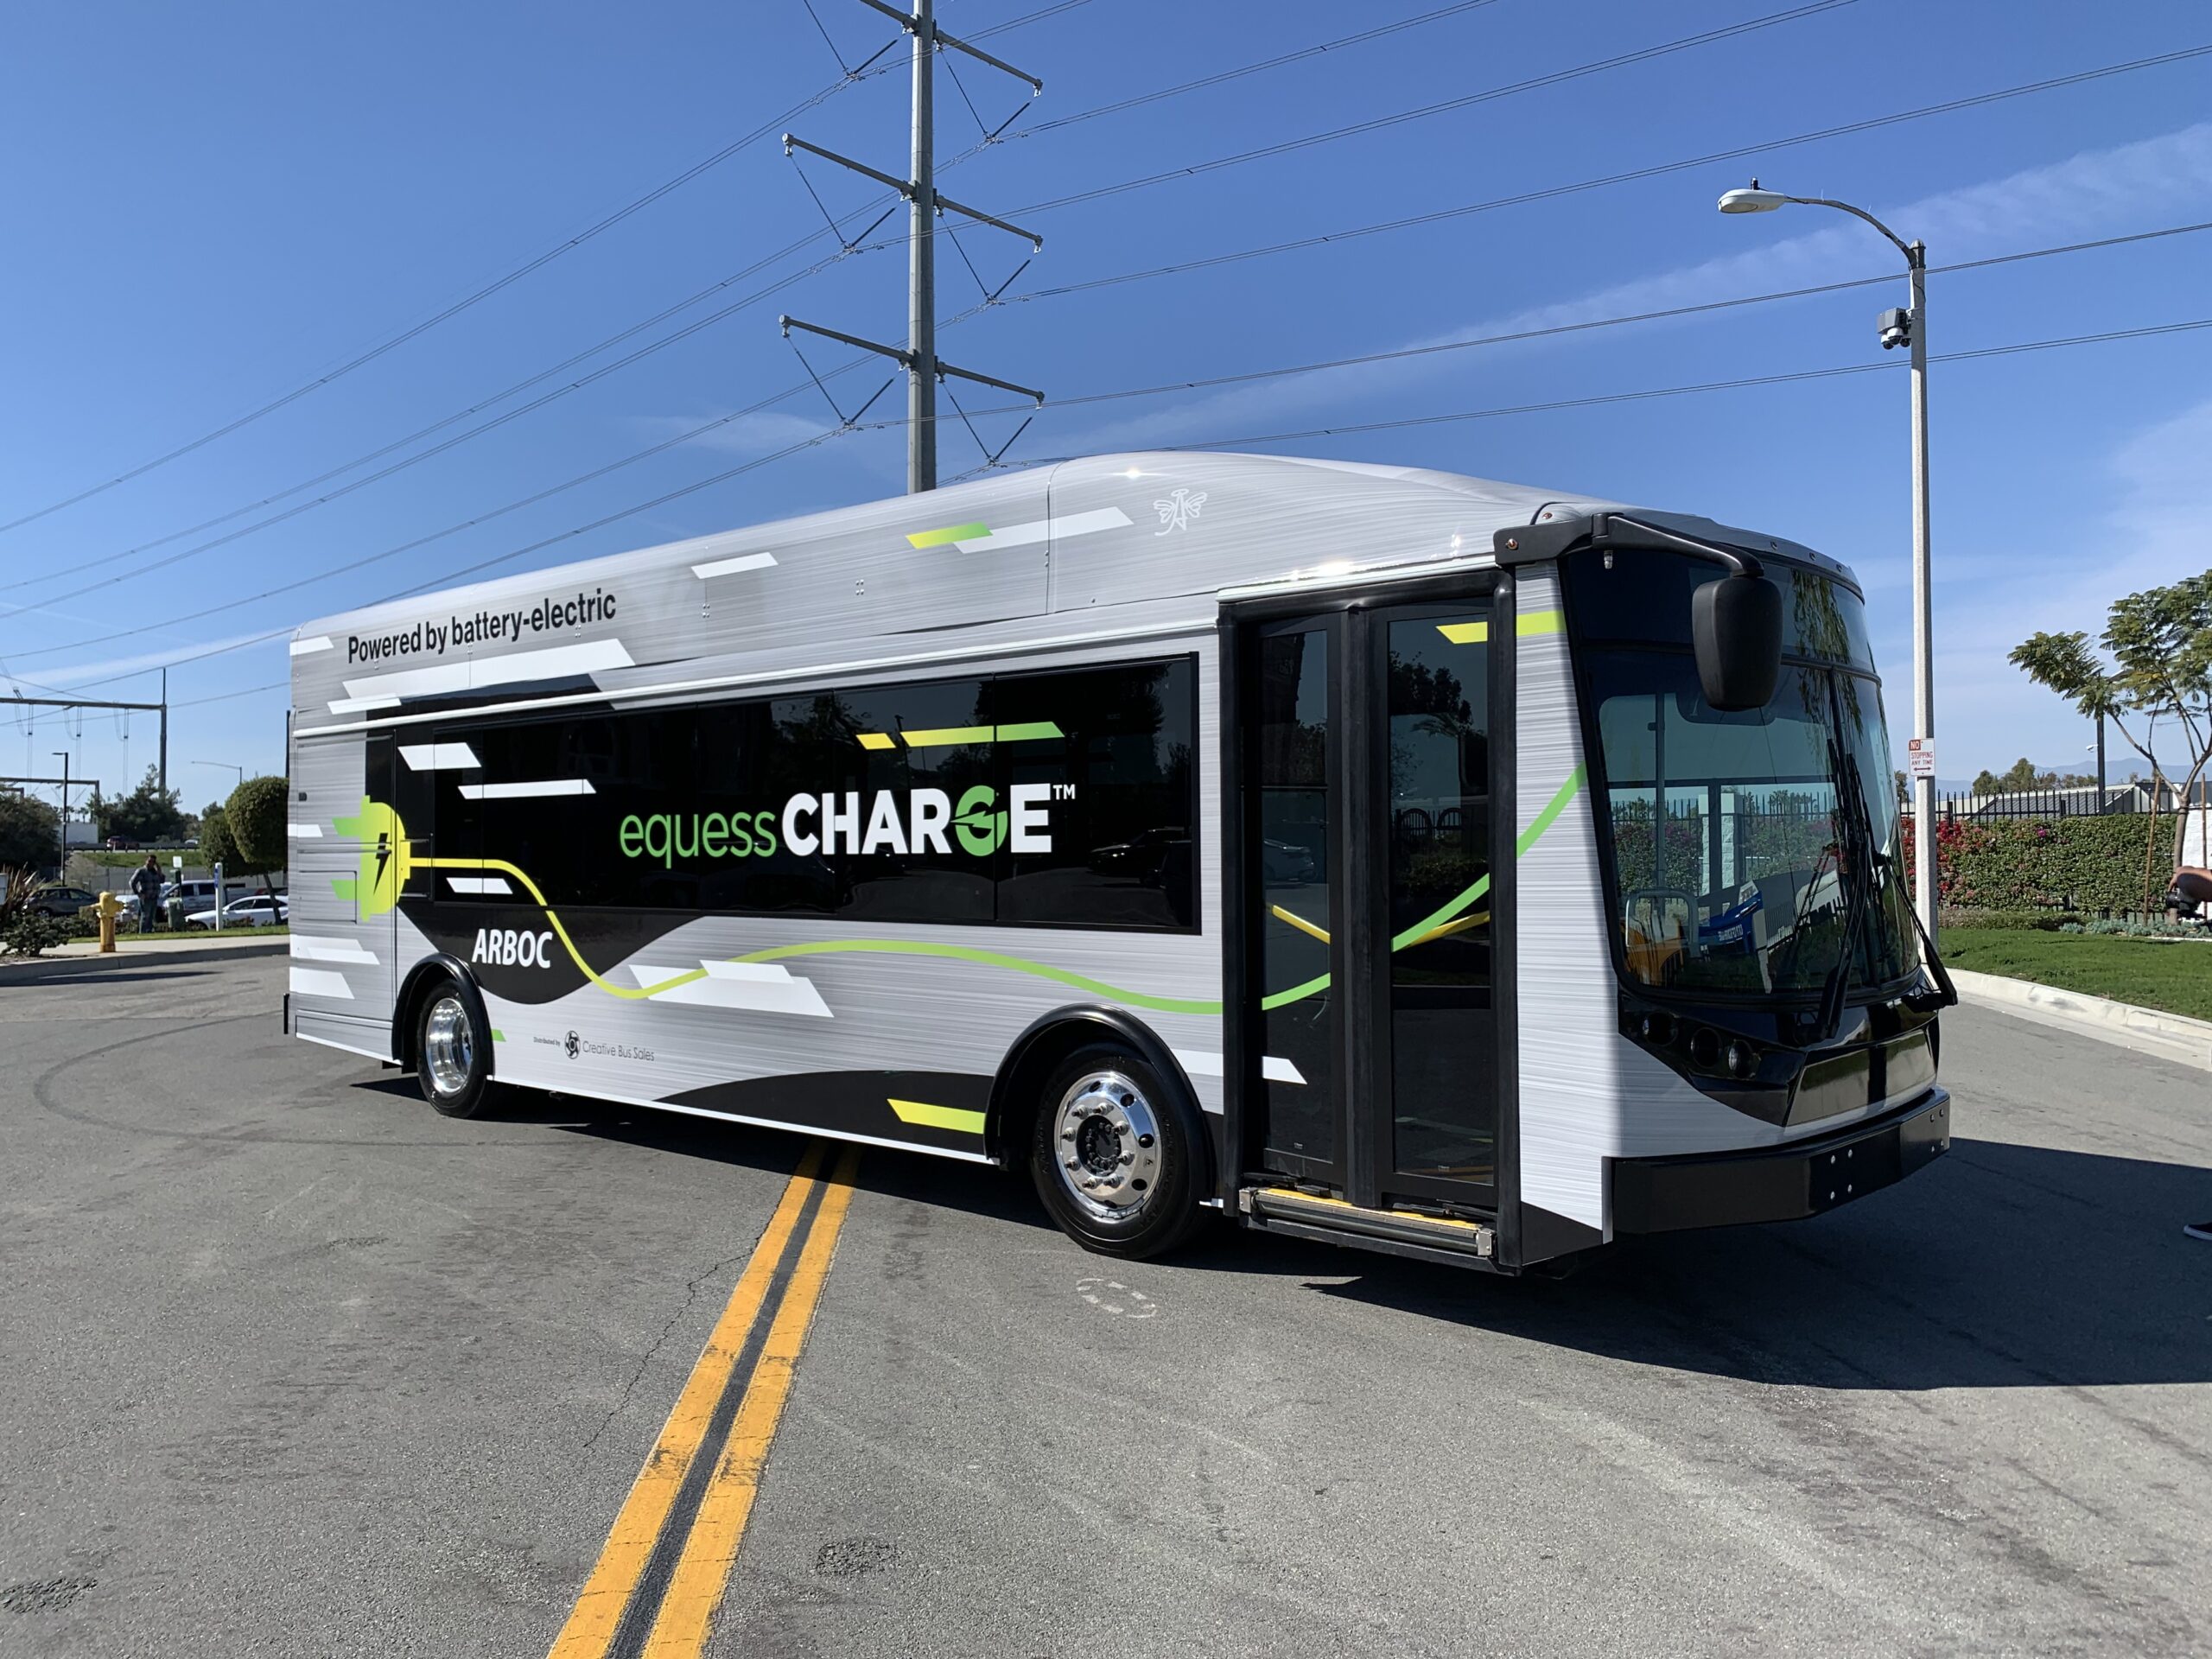 An electric bus, the 2021 ARBOC Equess CHARGE, is parked on the side of the road.